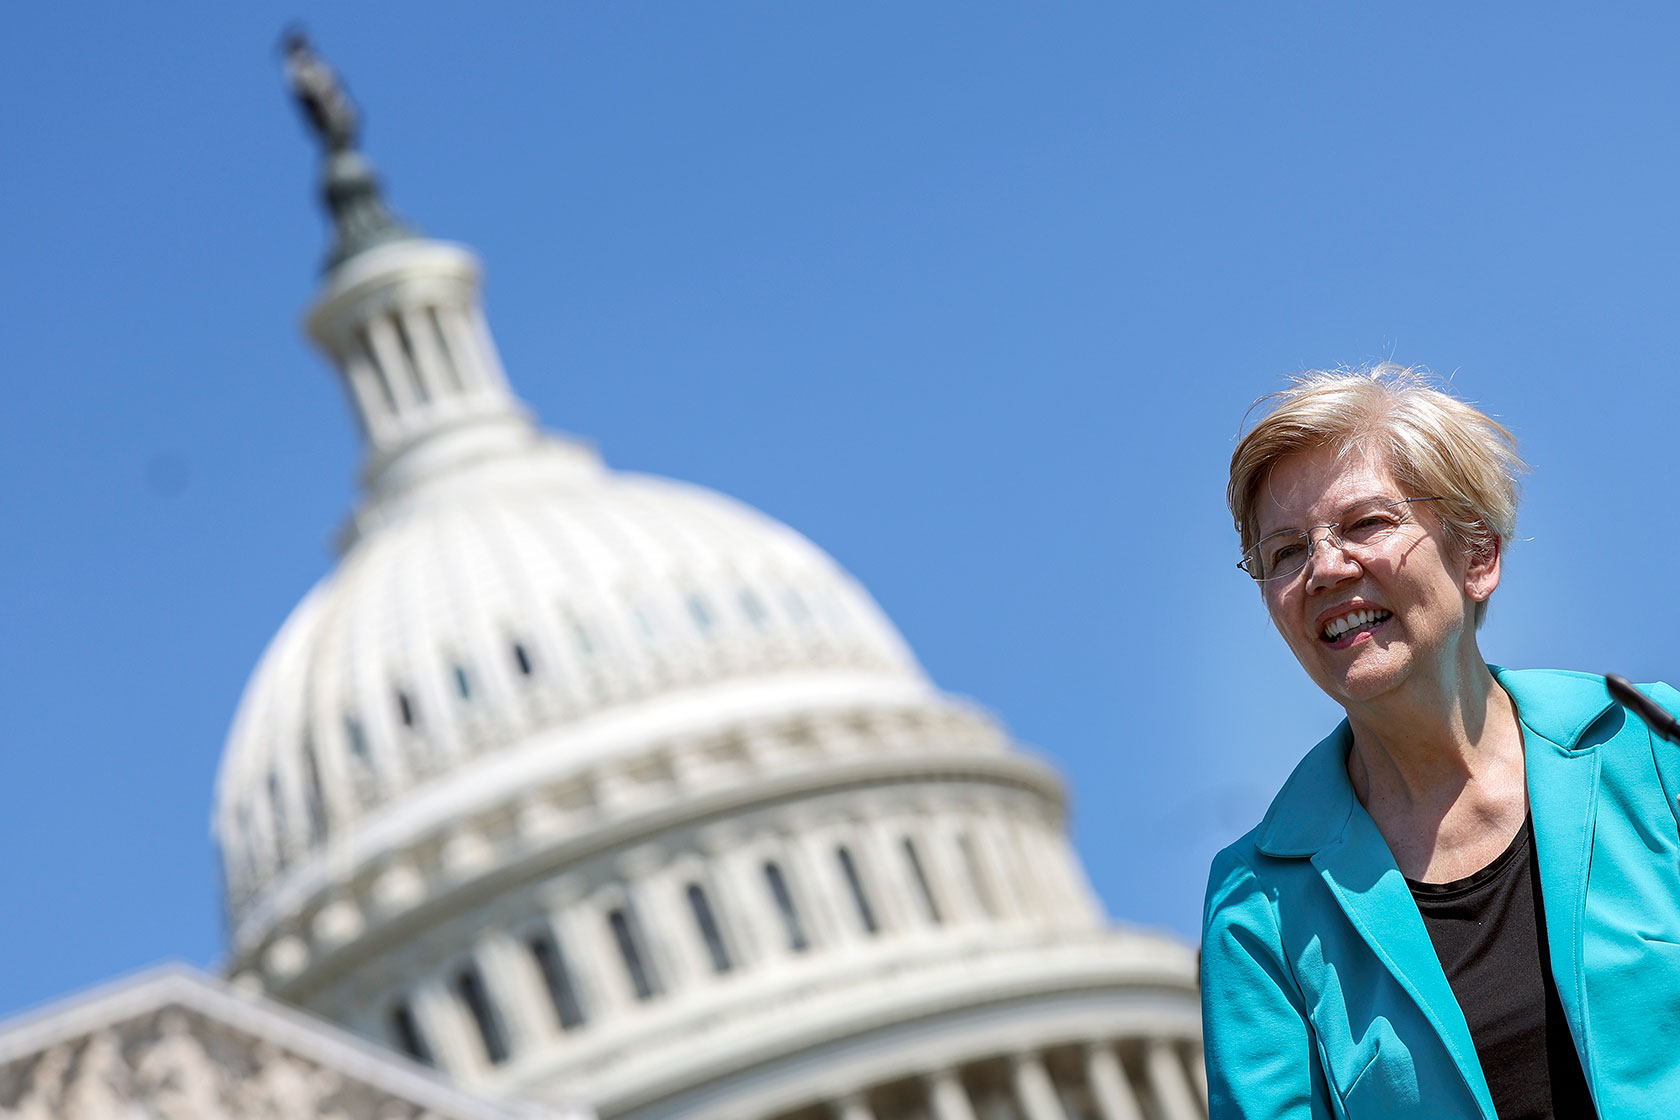 Photo shows a tilted image of Elizabeth Warren wearing turquoise as she speaks in front of the U.S. Capitol building dome against a blue sky